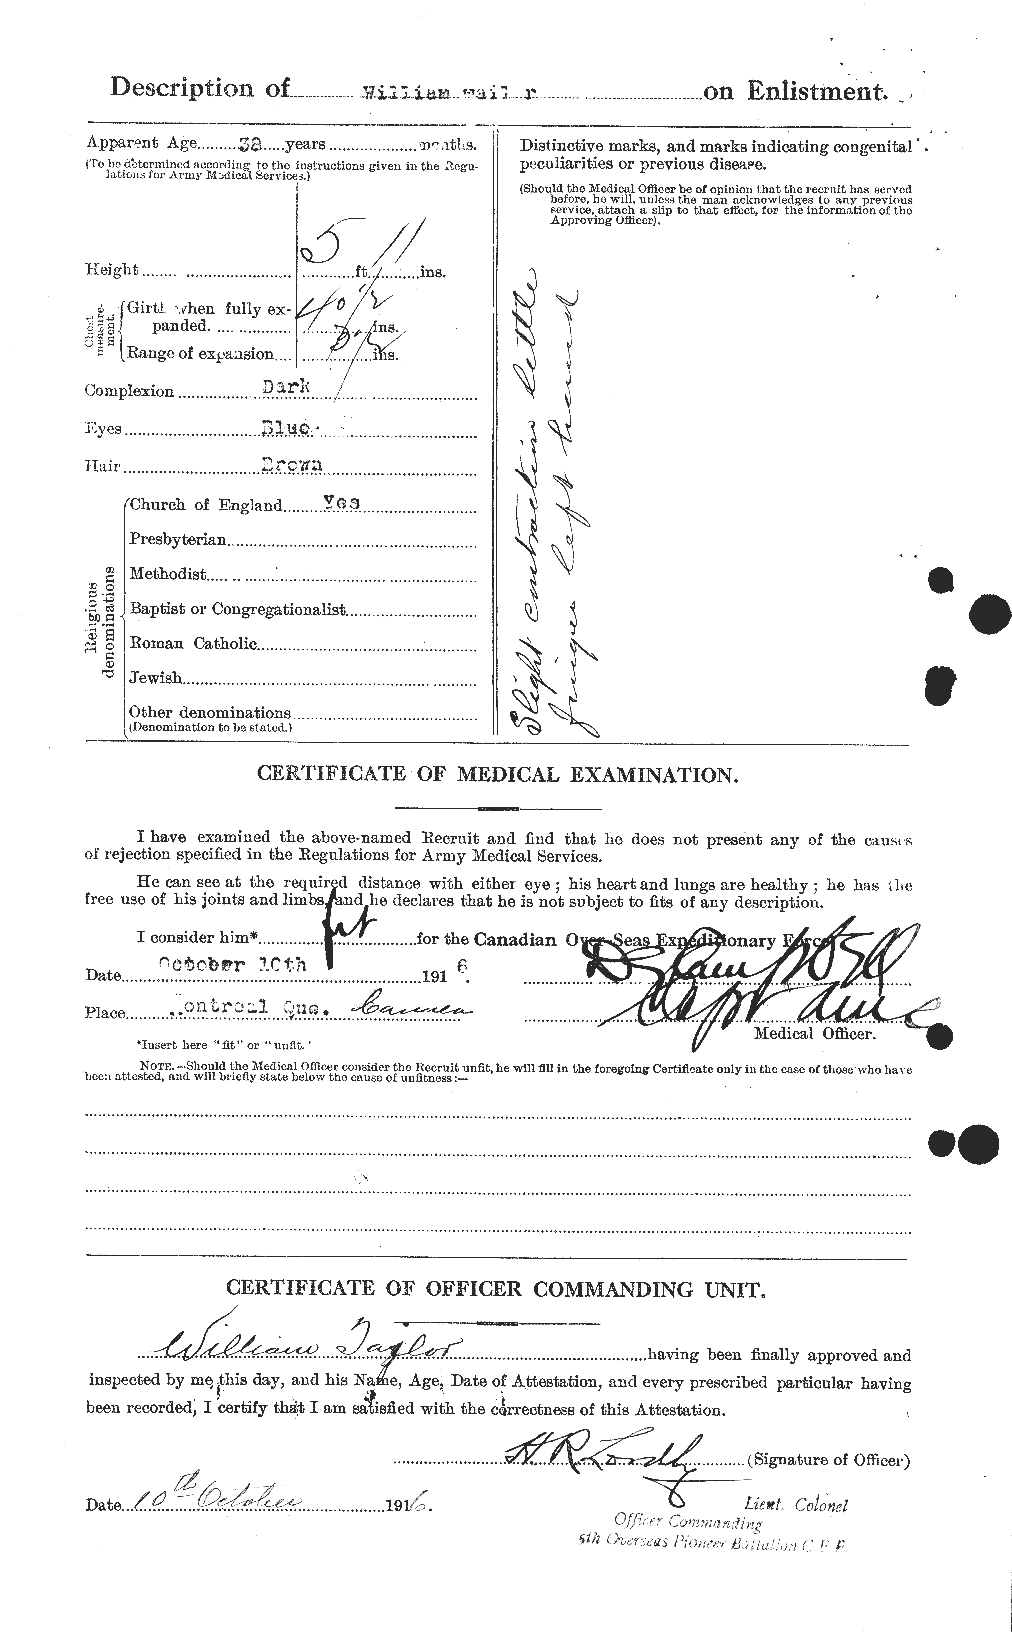 Personnel Records of the First World War - CEF 628137b